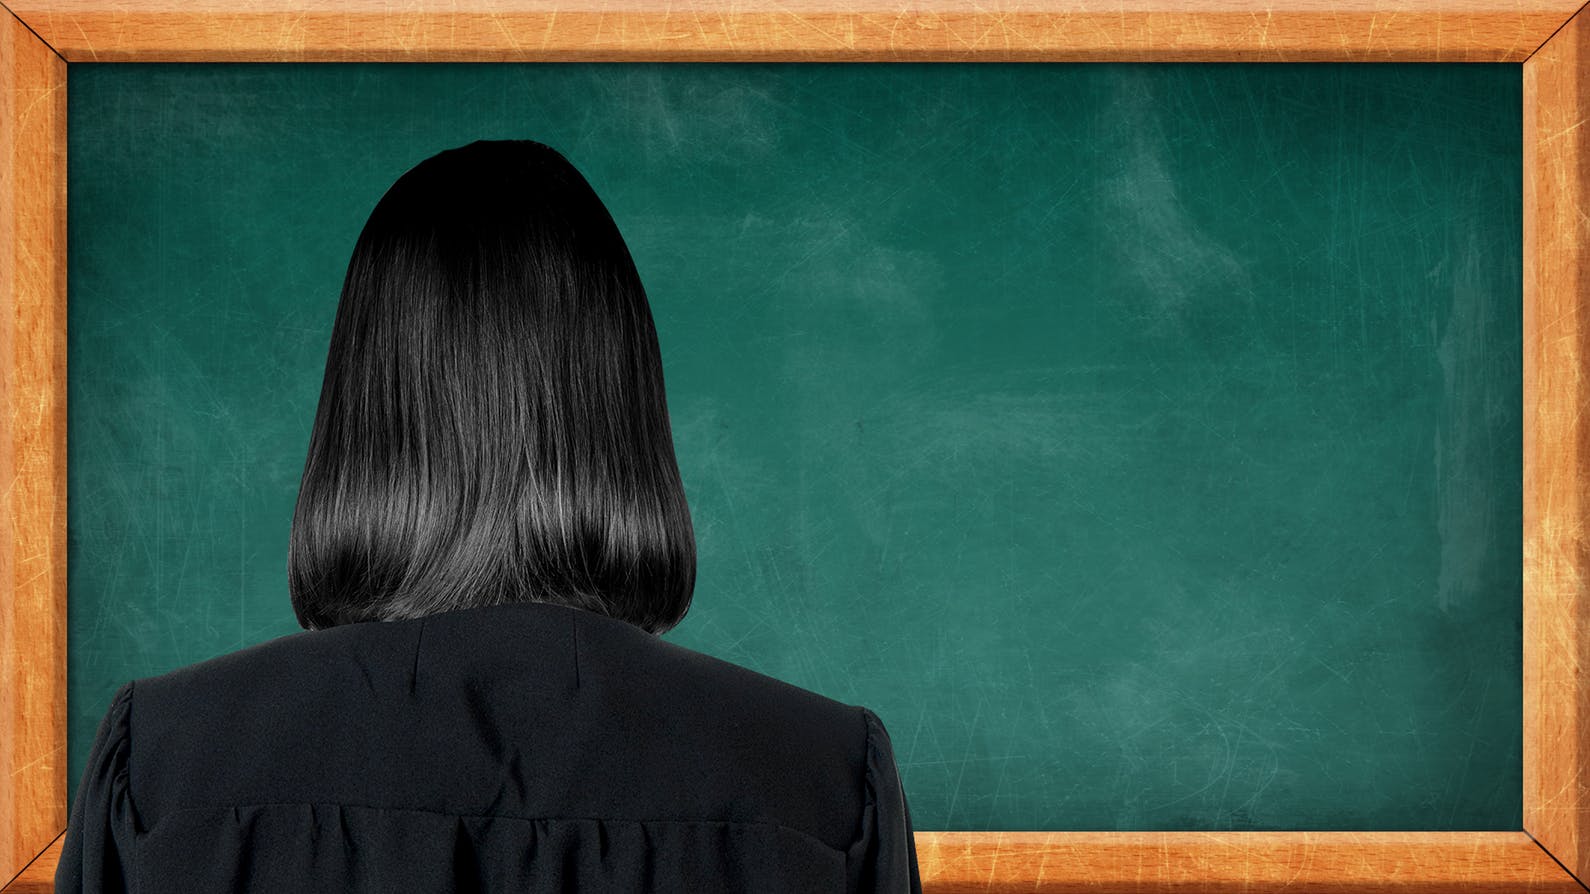 A mysterious teacher standing in front of a chalk board